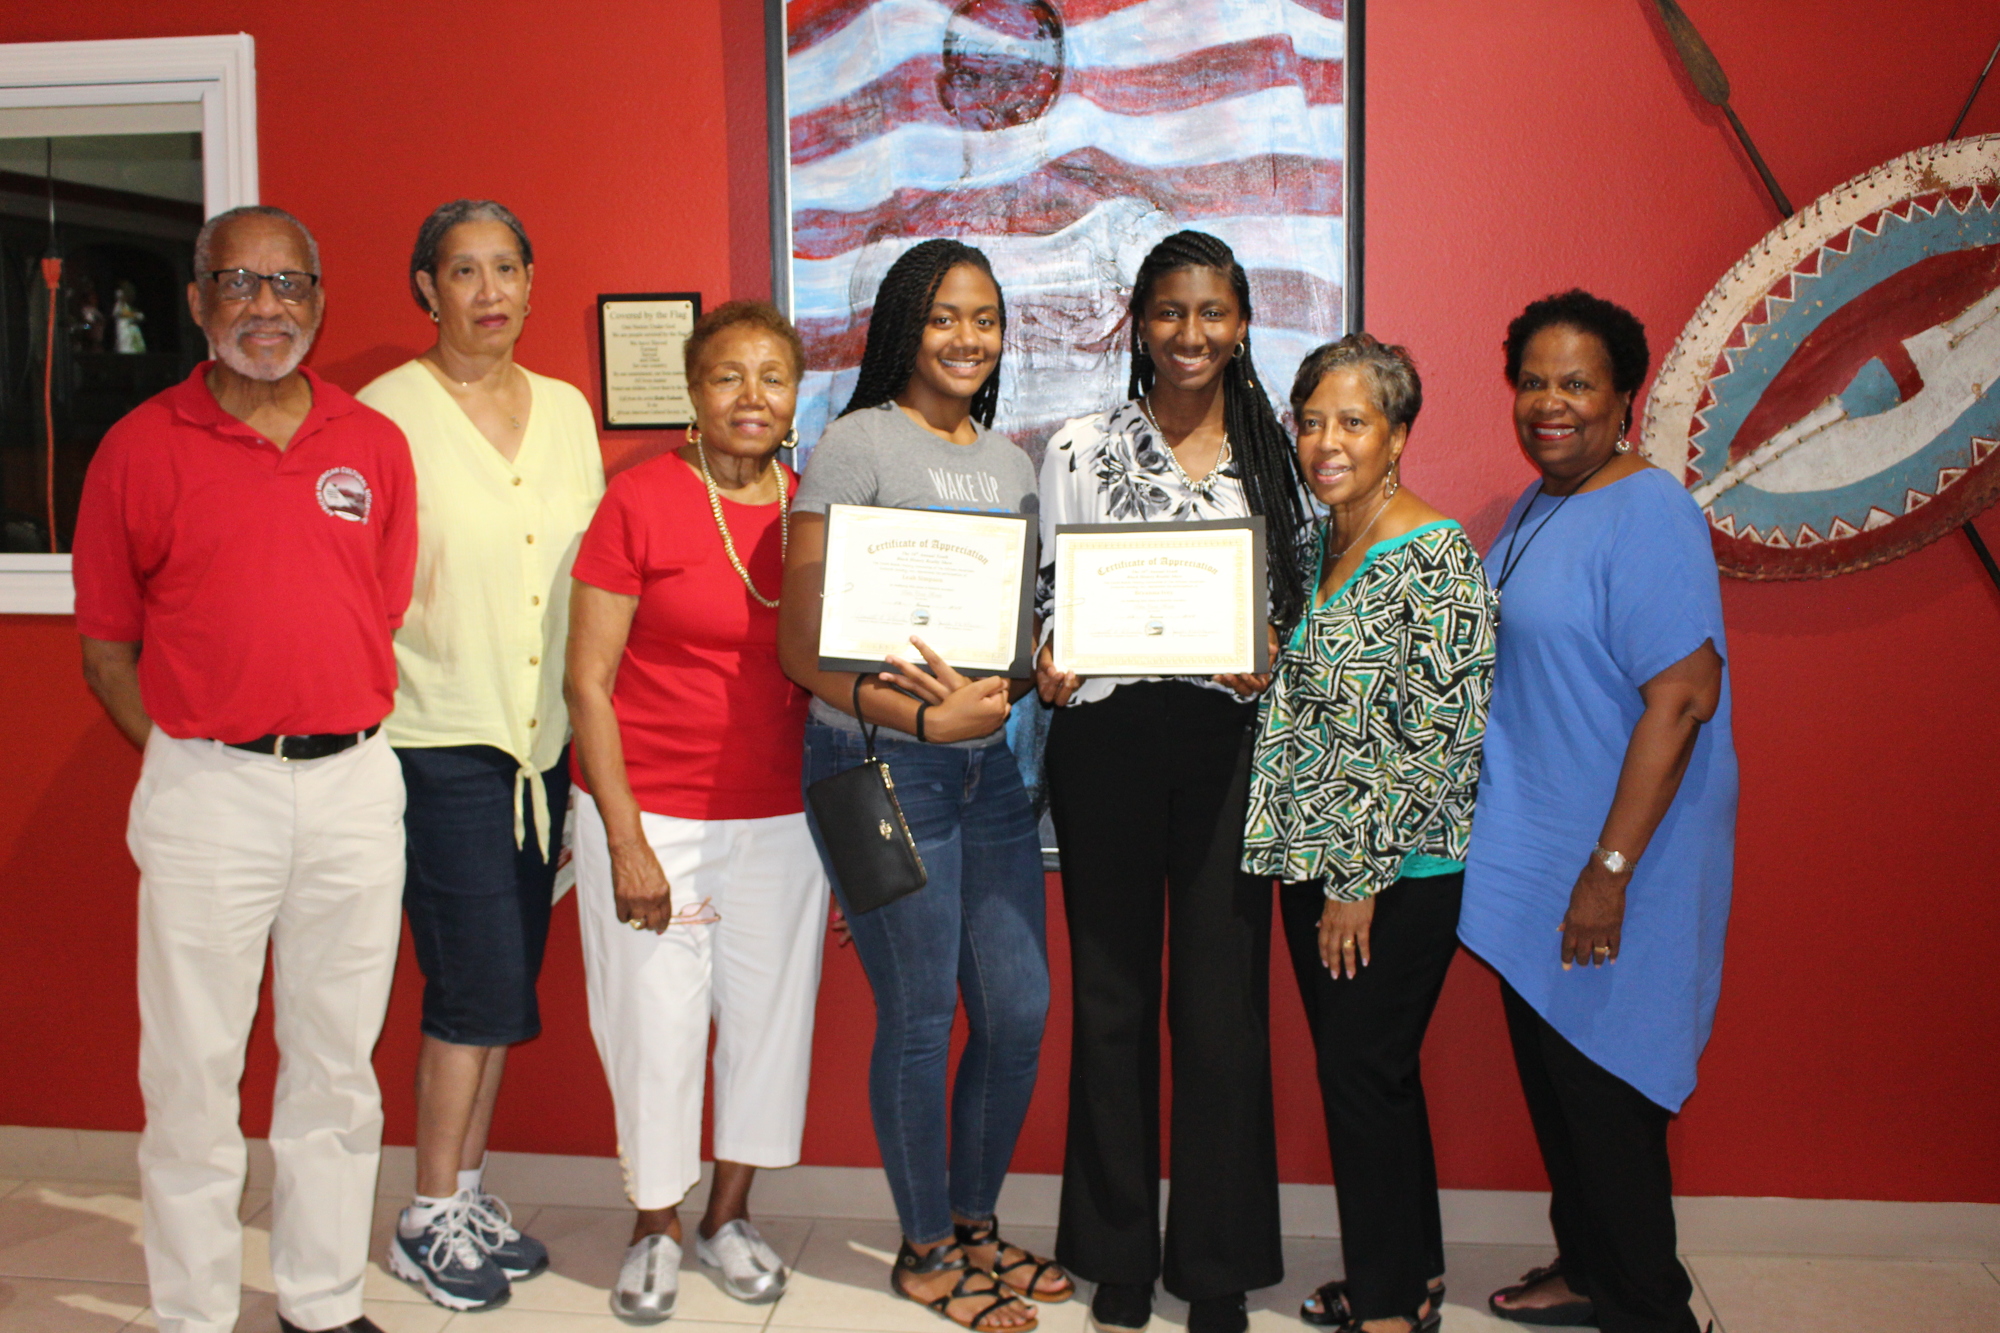 Students Leah Simpson and Bryanna Ivey receive AACS scholarship awards at the African American Cultural Center during the Juneteenth Celebration. Courtesy photo